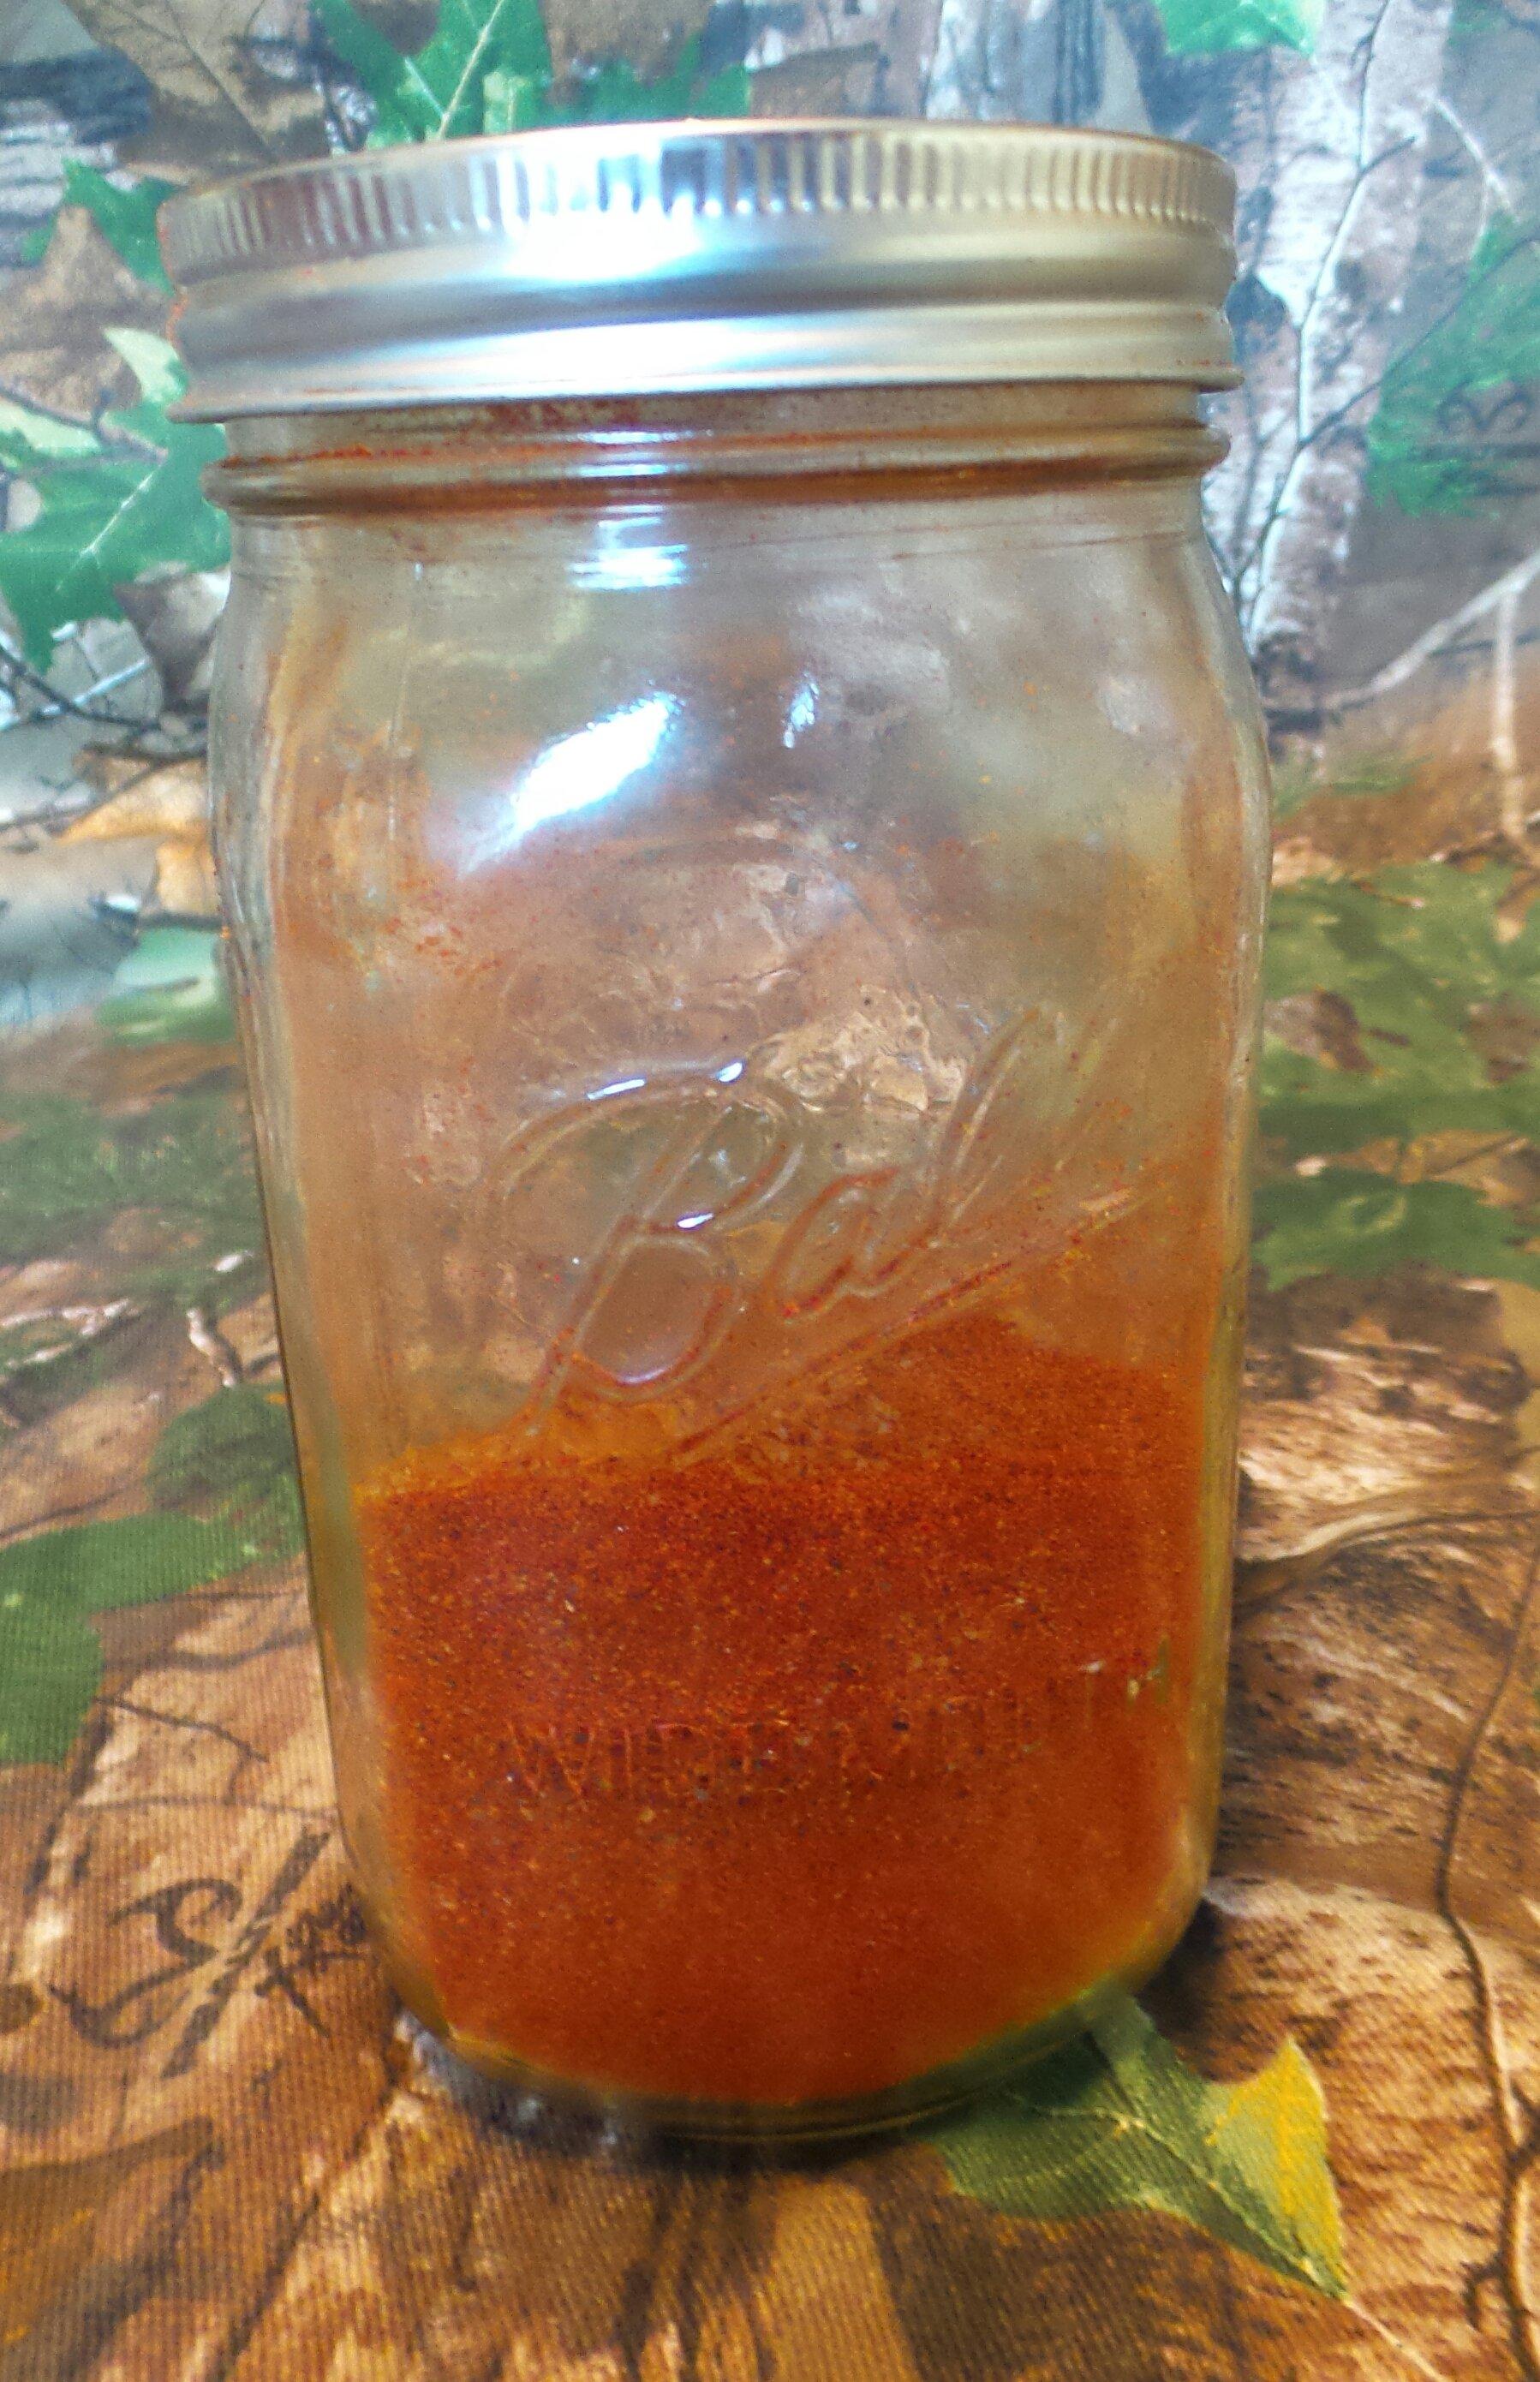 This barbecue rub recipe is great for wild pigs on the grill or smoker.